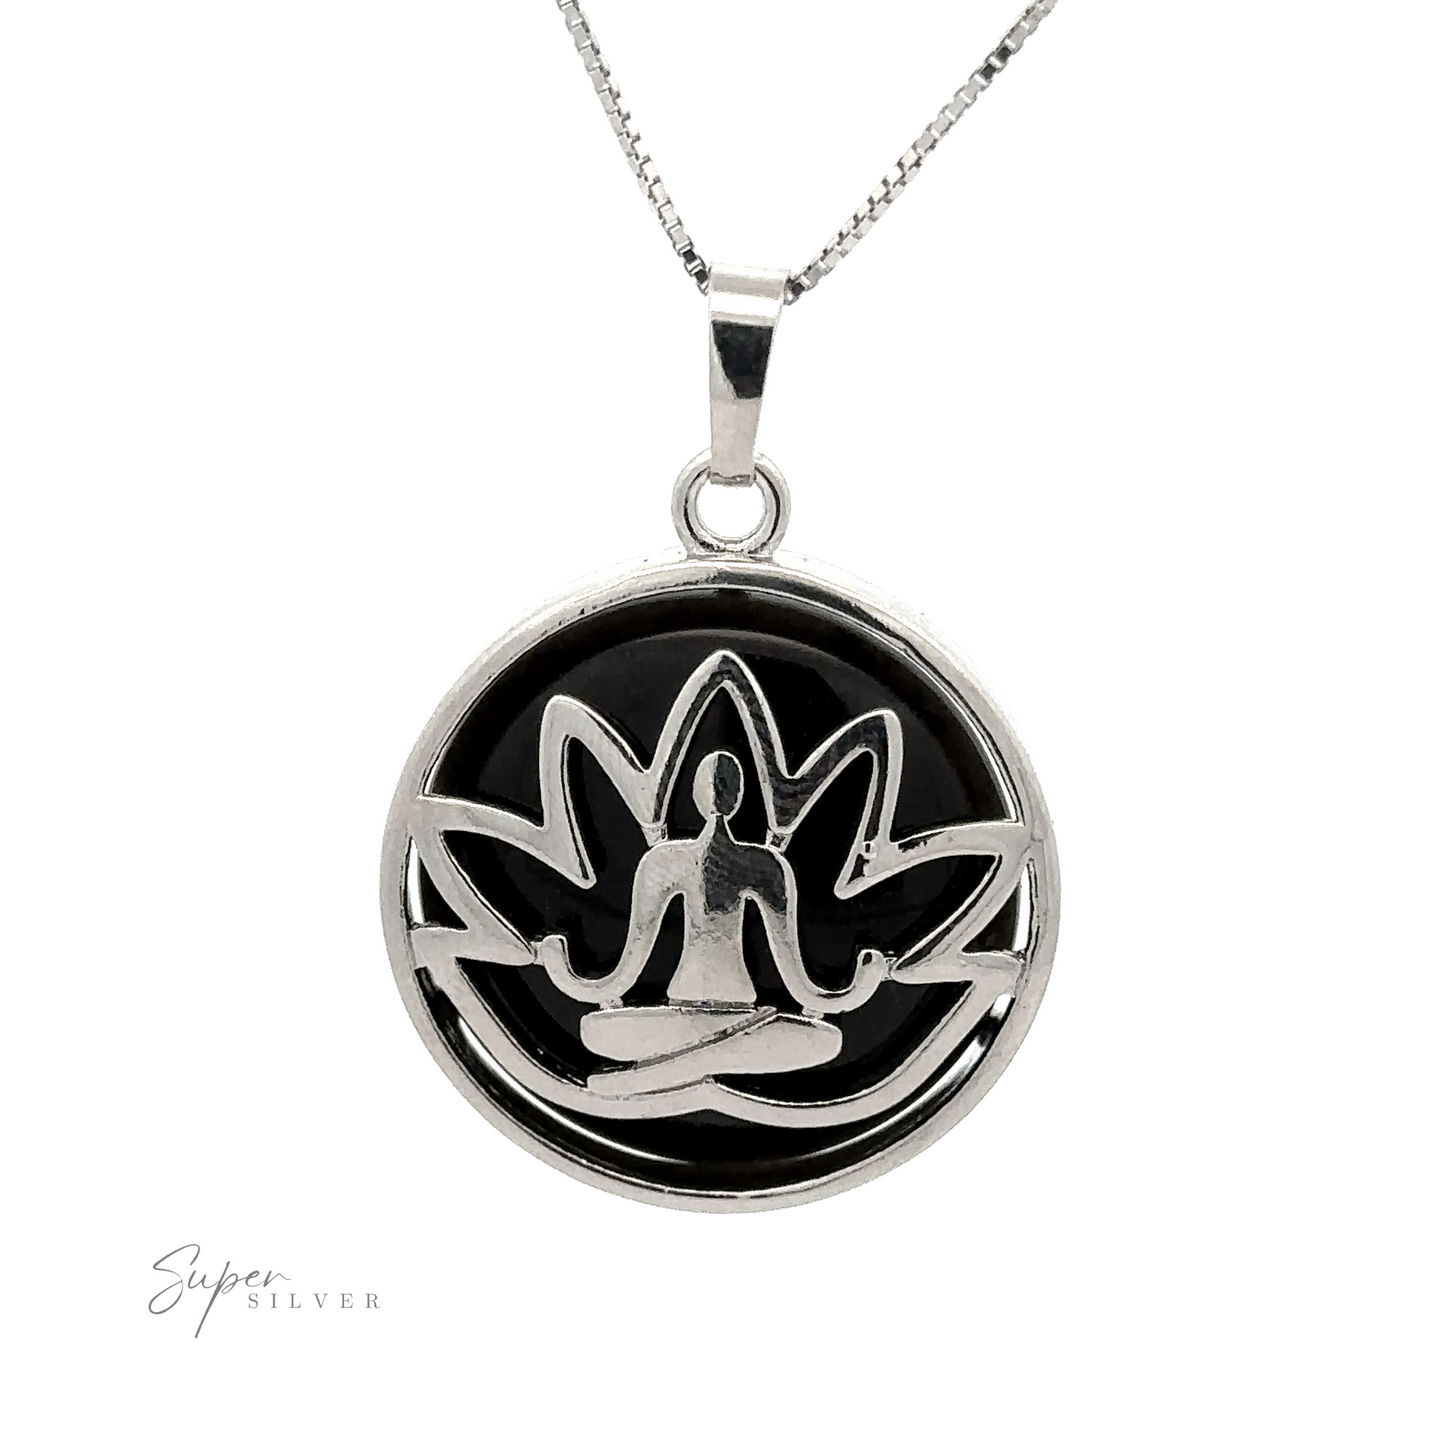 
                  
                    A Silver Plated Lotus Meditation Pendant with Gemstone featuring a lotus flower design and a person meditating in the center. The brand name "Super Silver" is visible in the bottom left corner, adding a touch of elegance.
                  
                